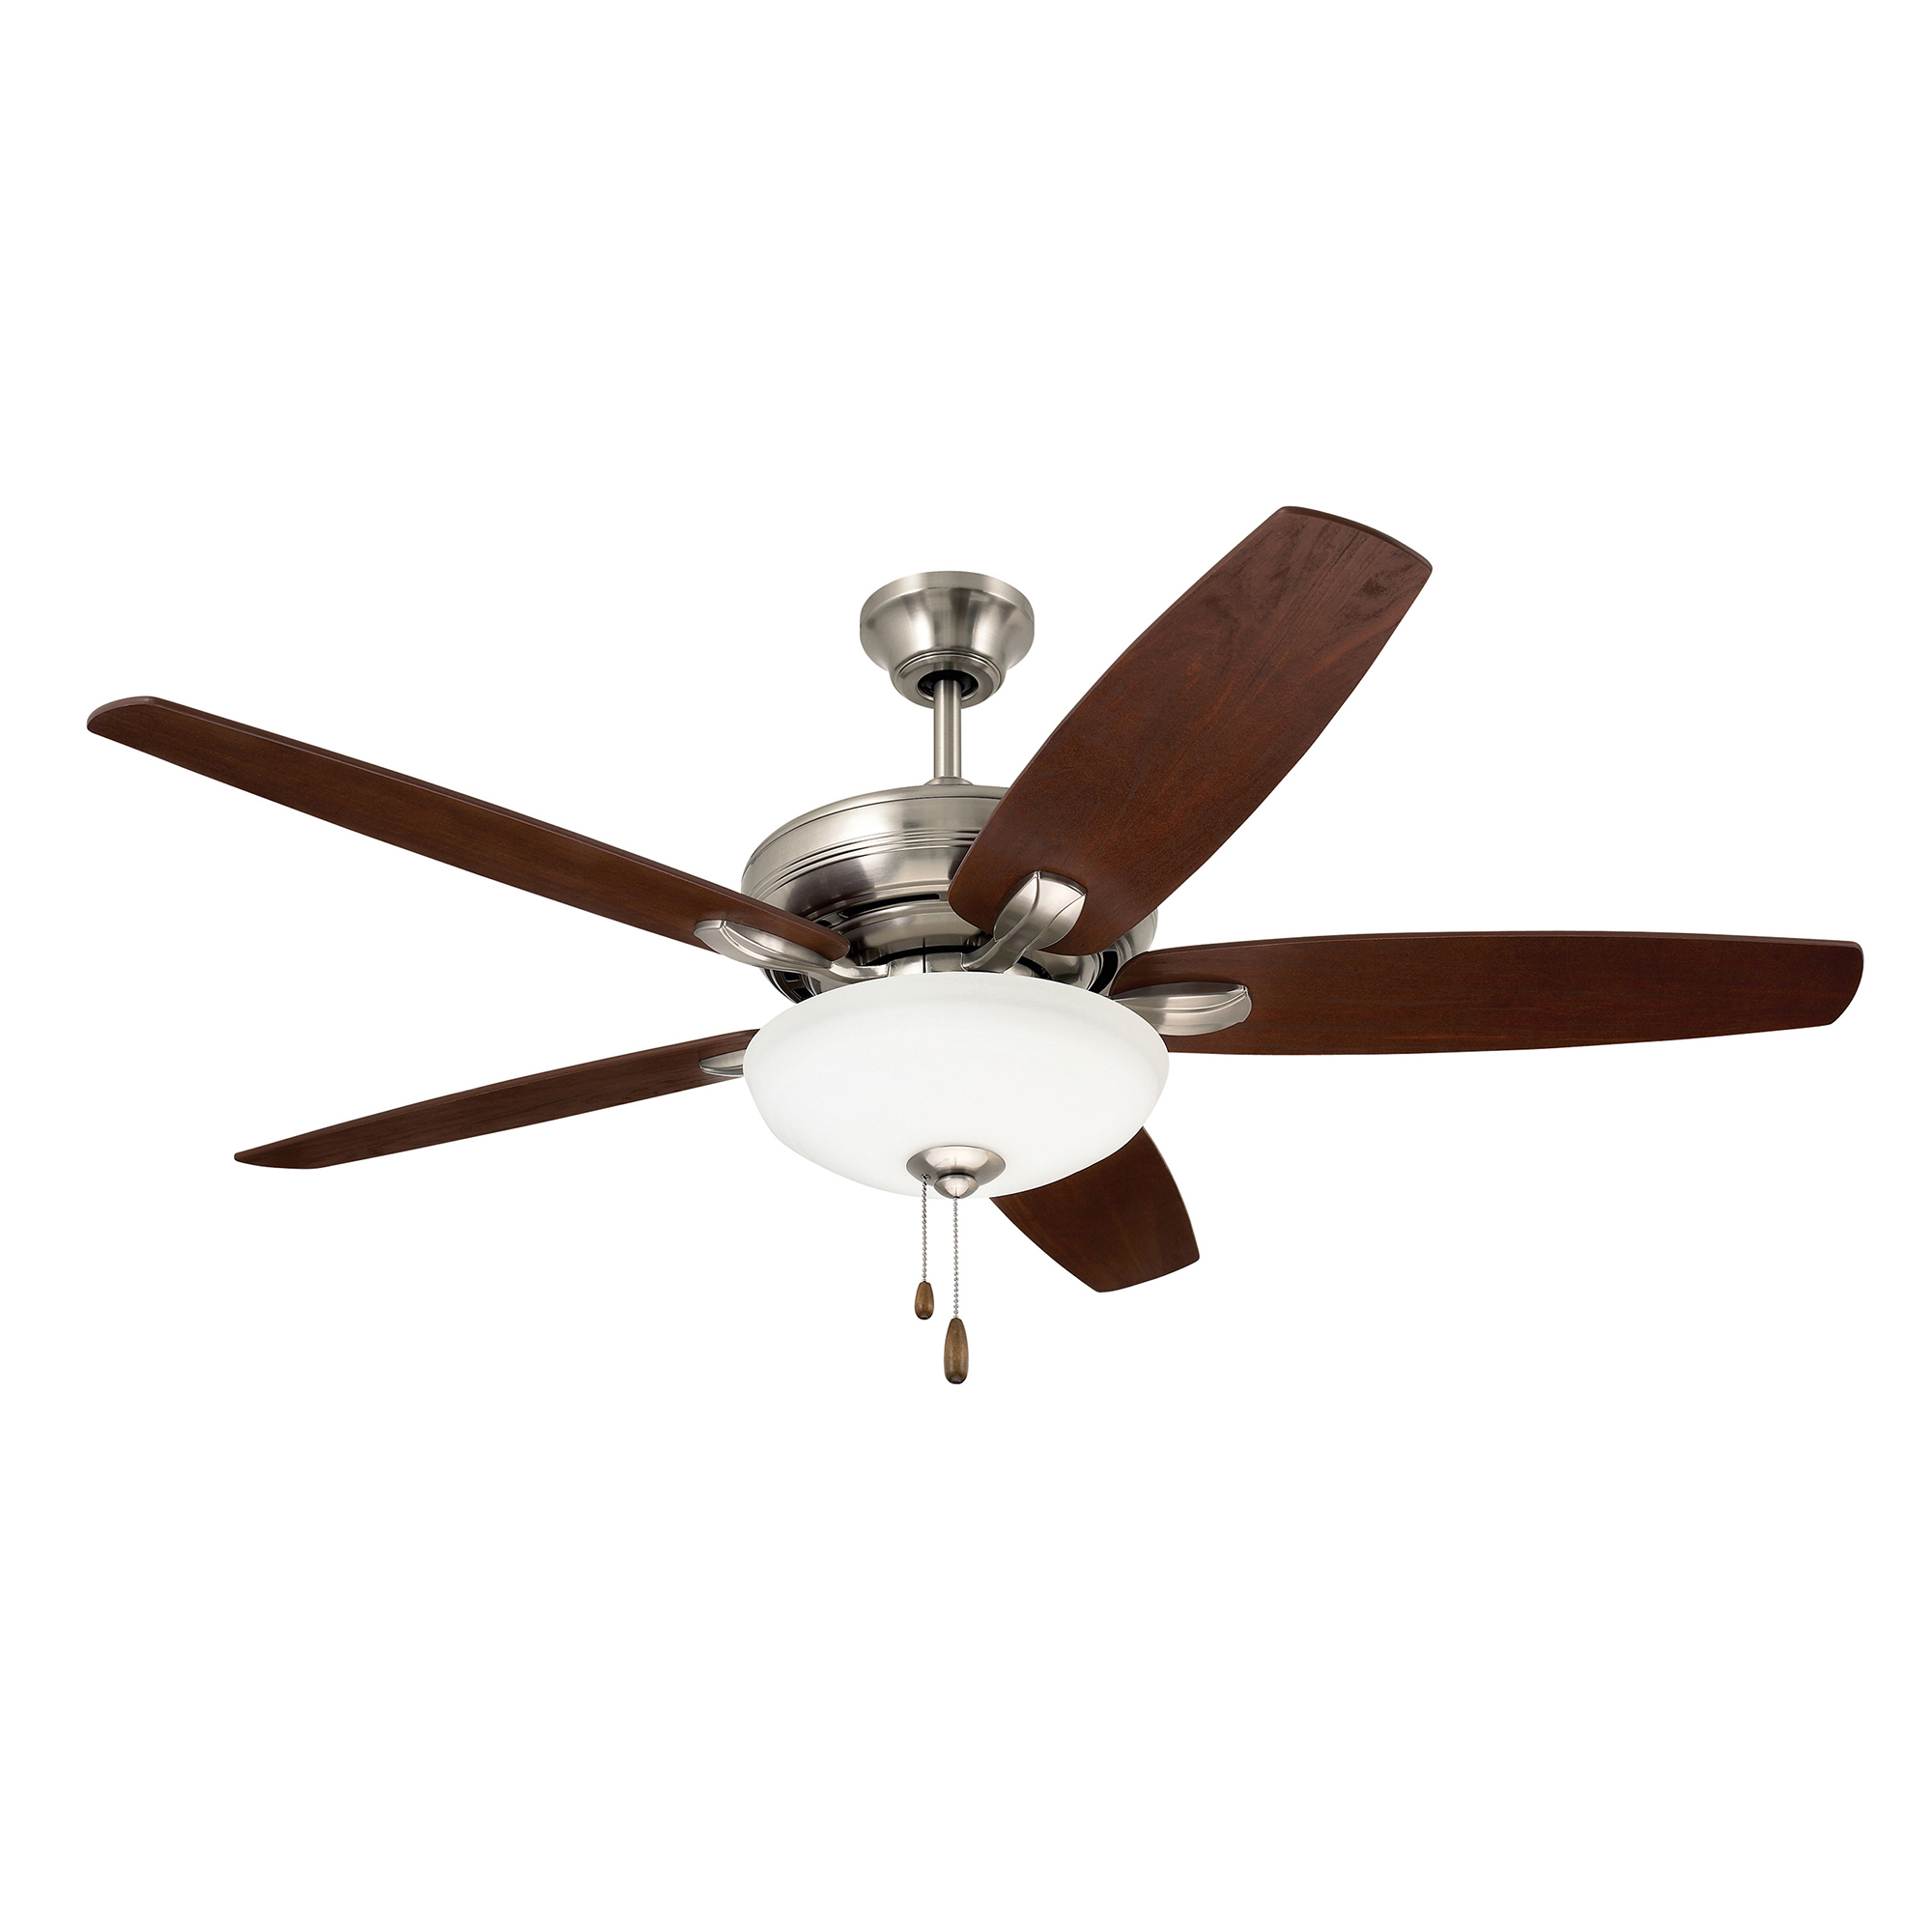 kathy ireland HOME by Luminance Brands 52 inch Ashland Low Profile Hugger Ceiling Fan with LED Light Kit in Brushed Steel with R